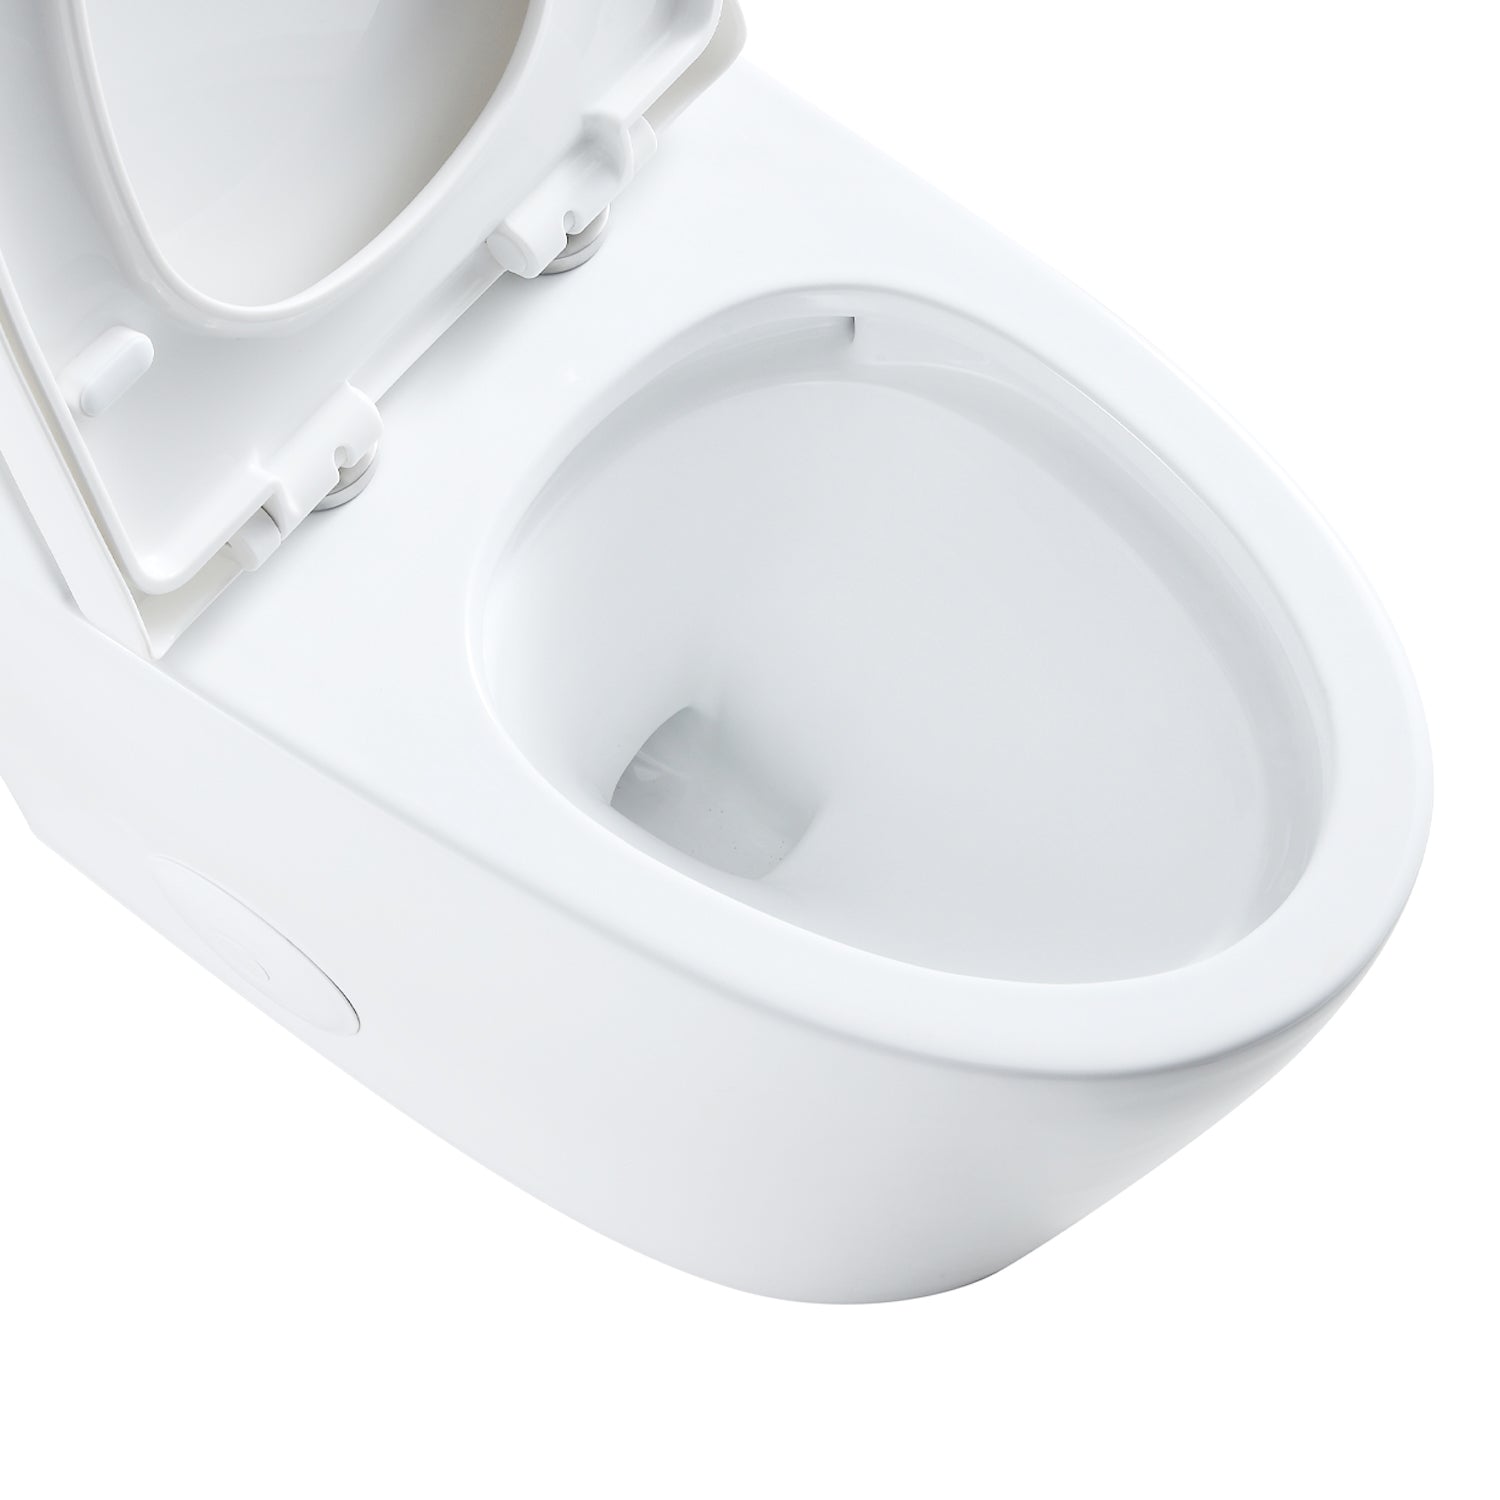 DAX One Piece Elongated Toilet with Soft Closing Seat and Dual Flush High-Efficiency, Porcelain, White Finish, Height 26-7/16 Inches (BSN-80)